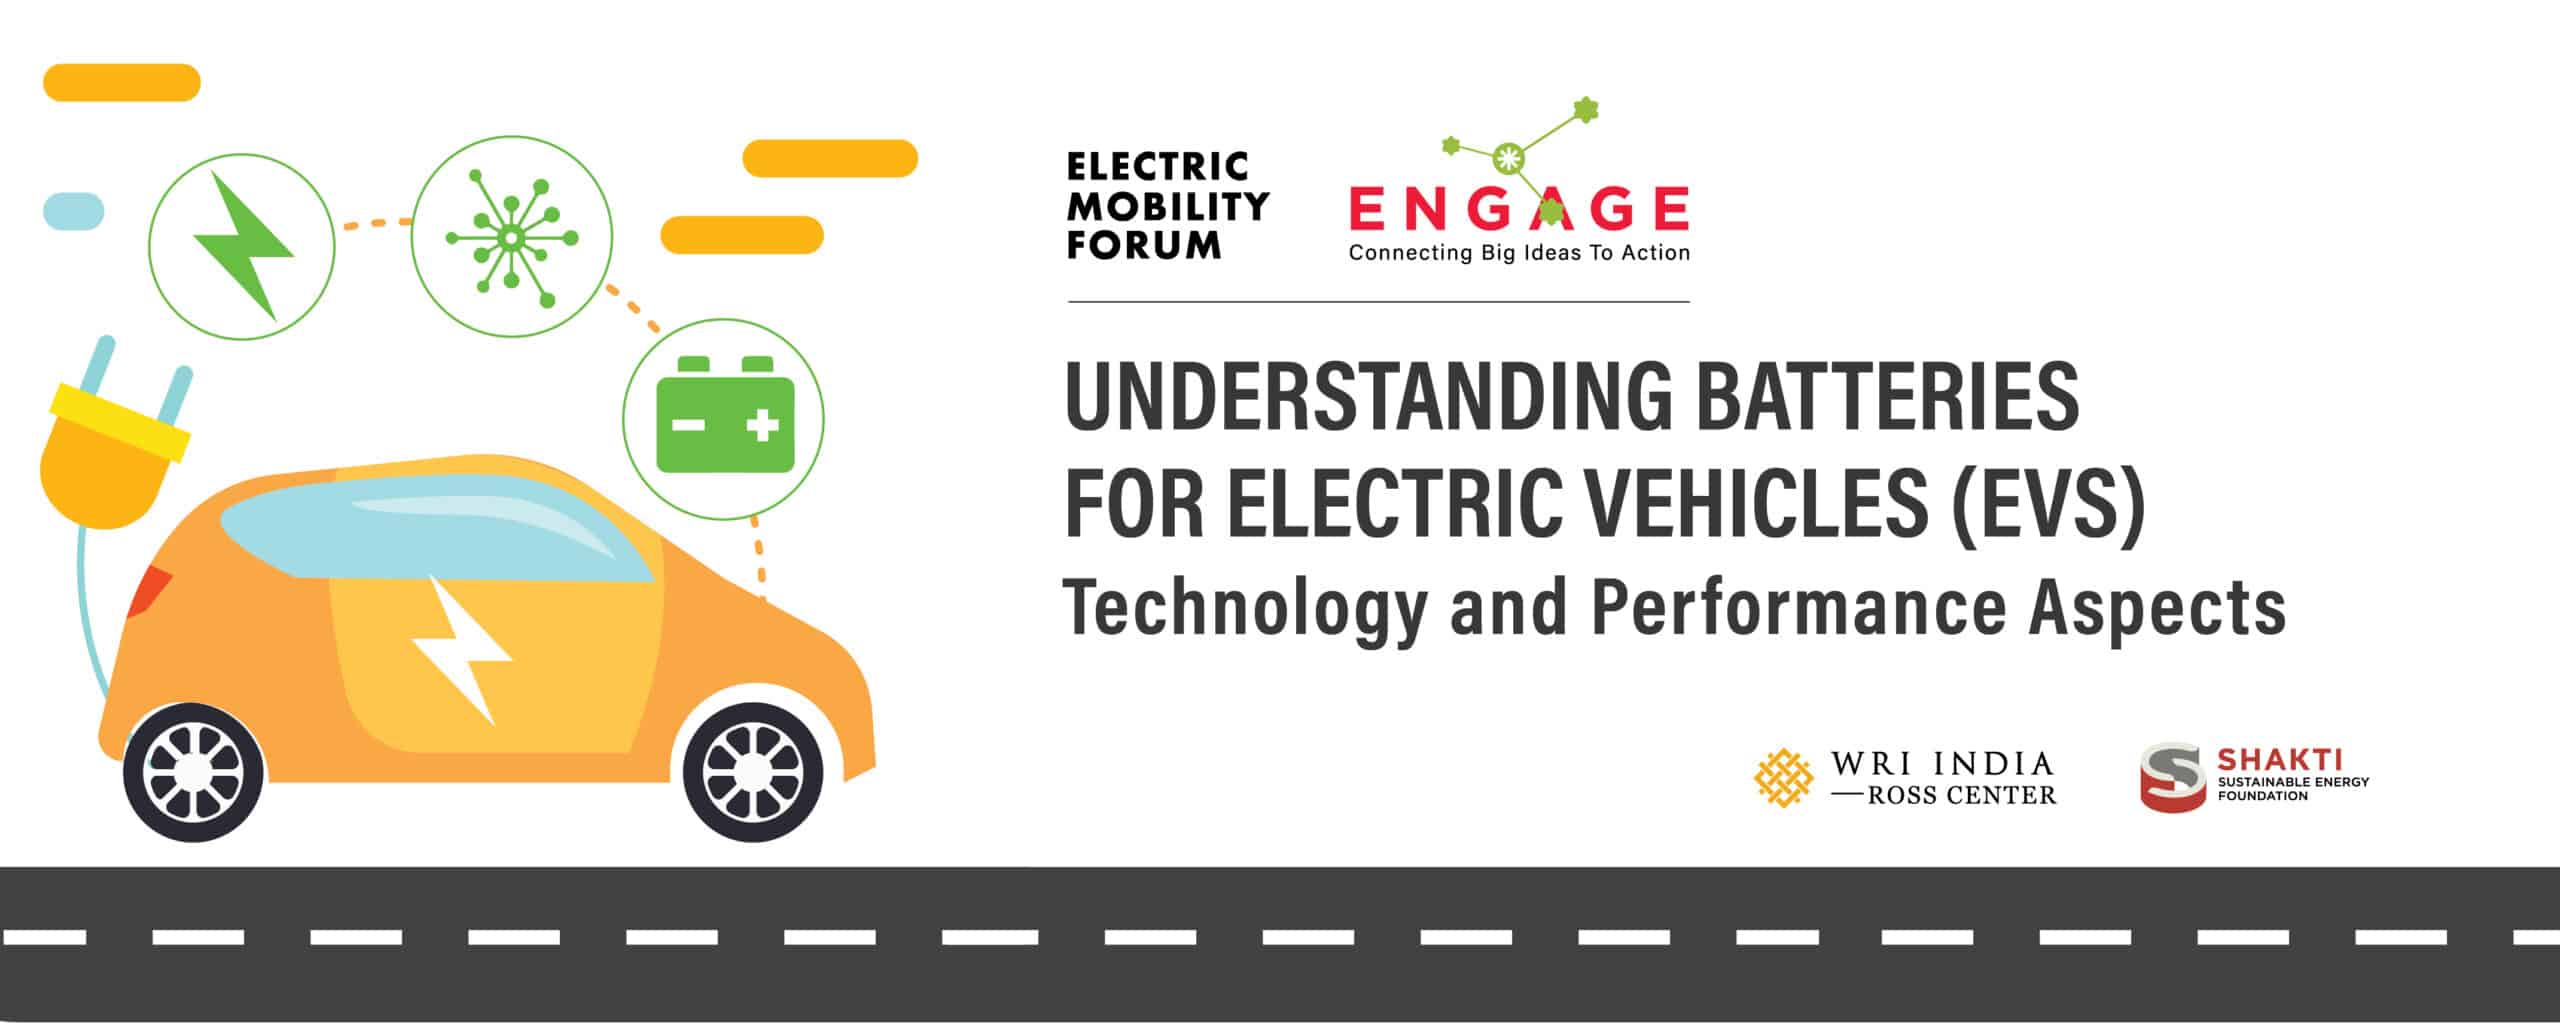 Understanding Batteries for Electric Vehicles (EV): Technology and Performance Aspects